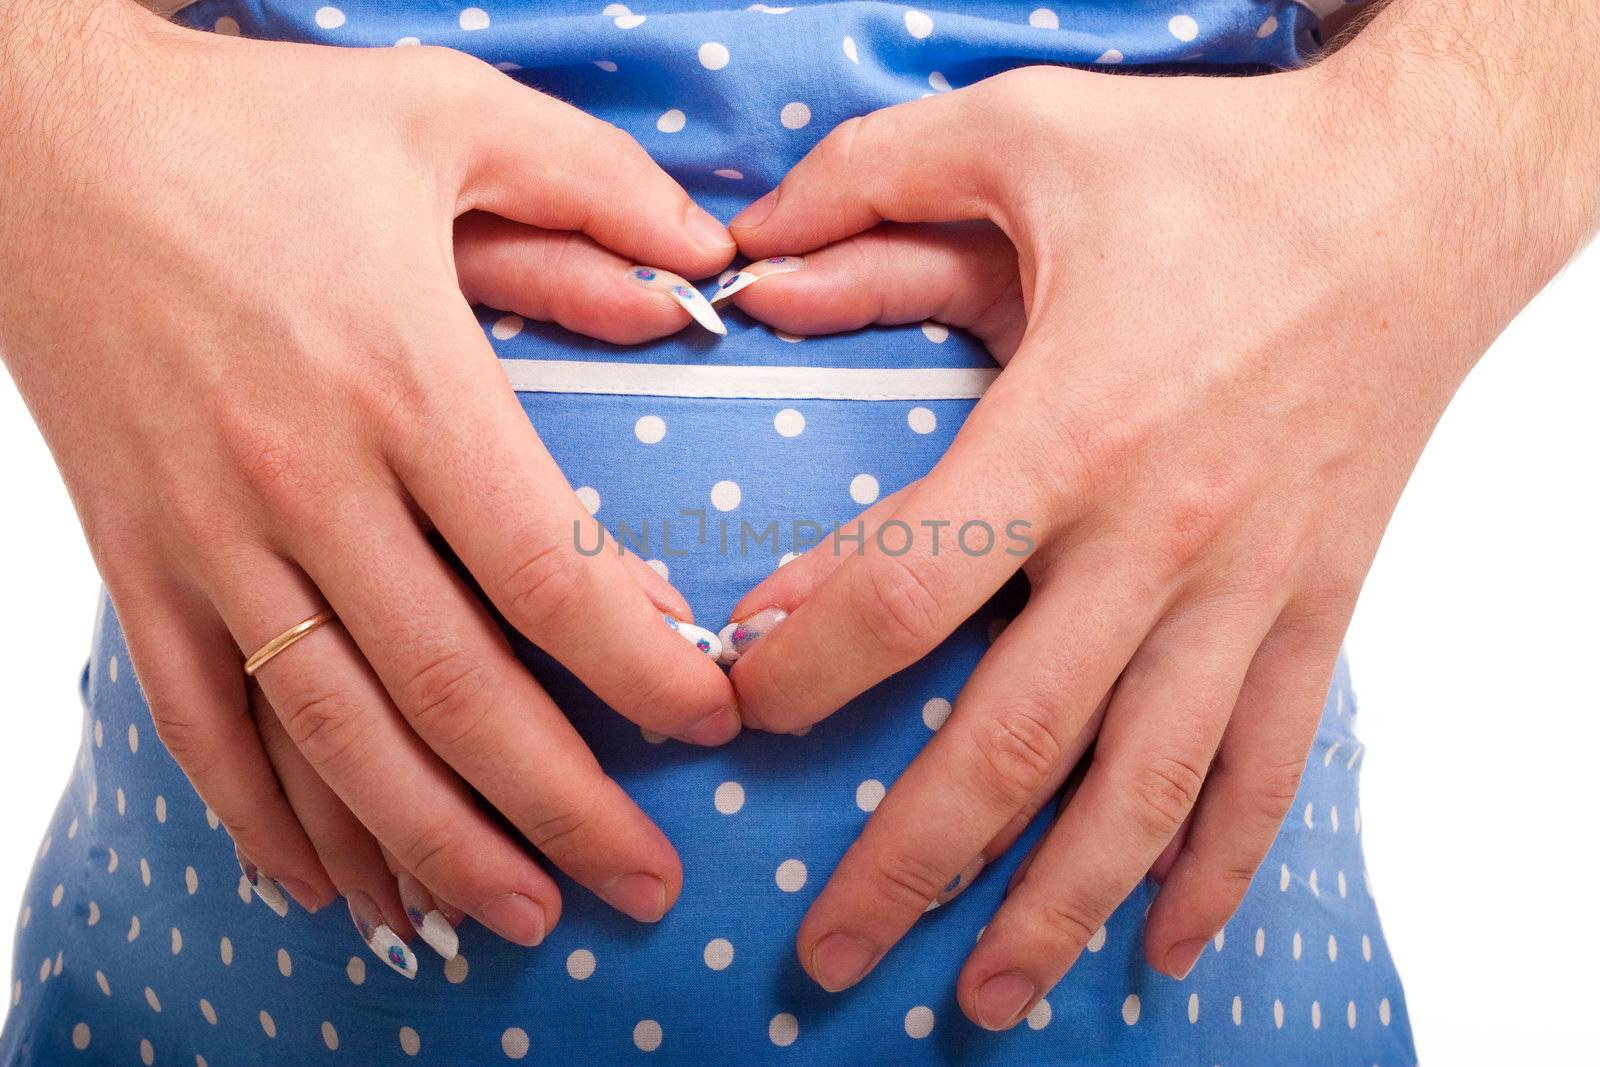 Two pairs of hands embracing belly tender.